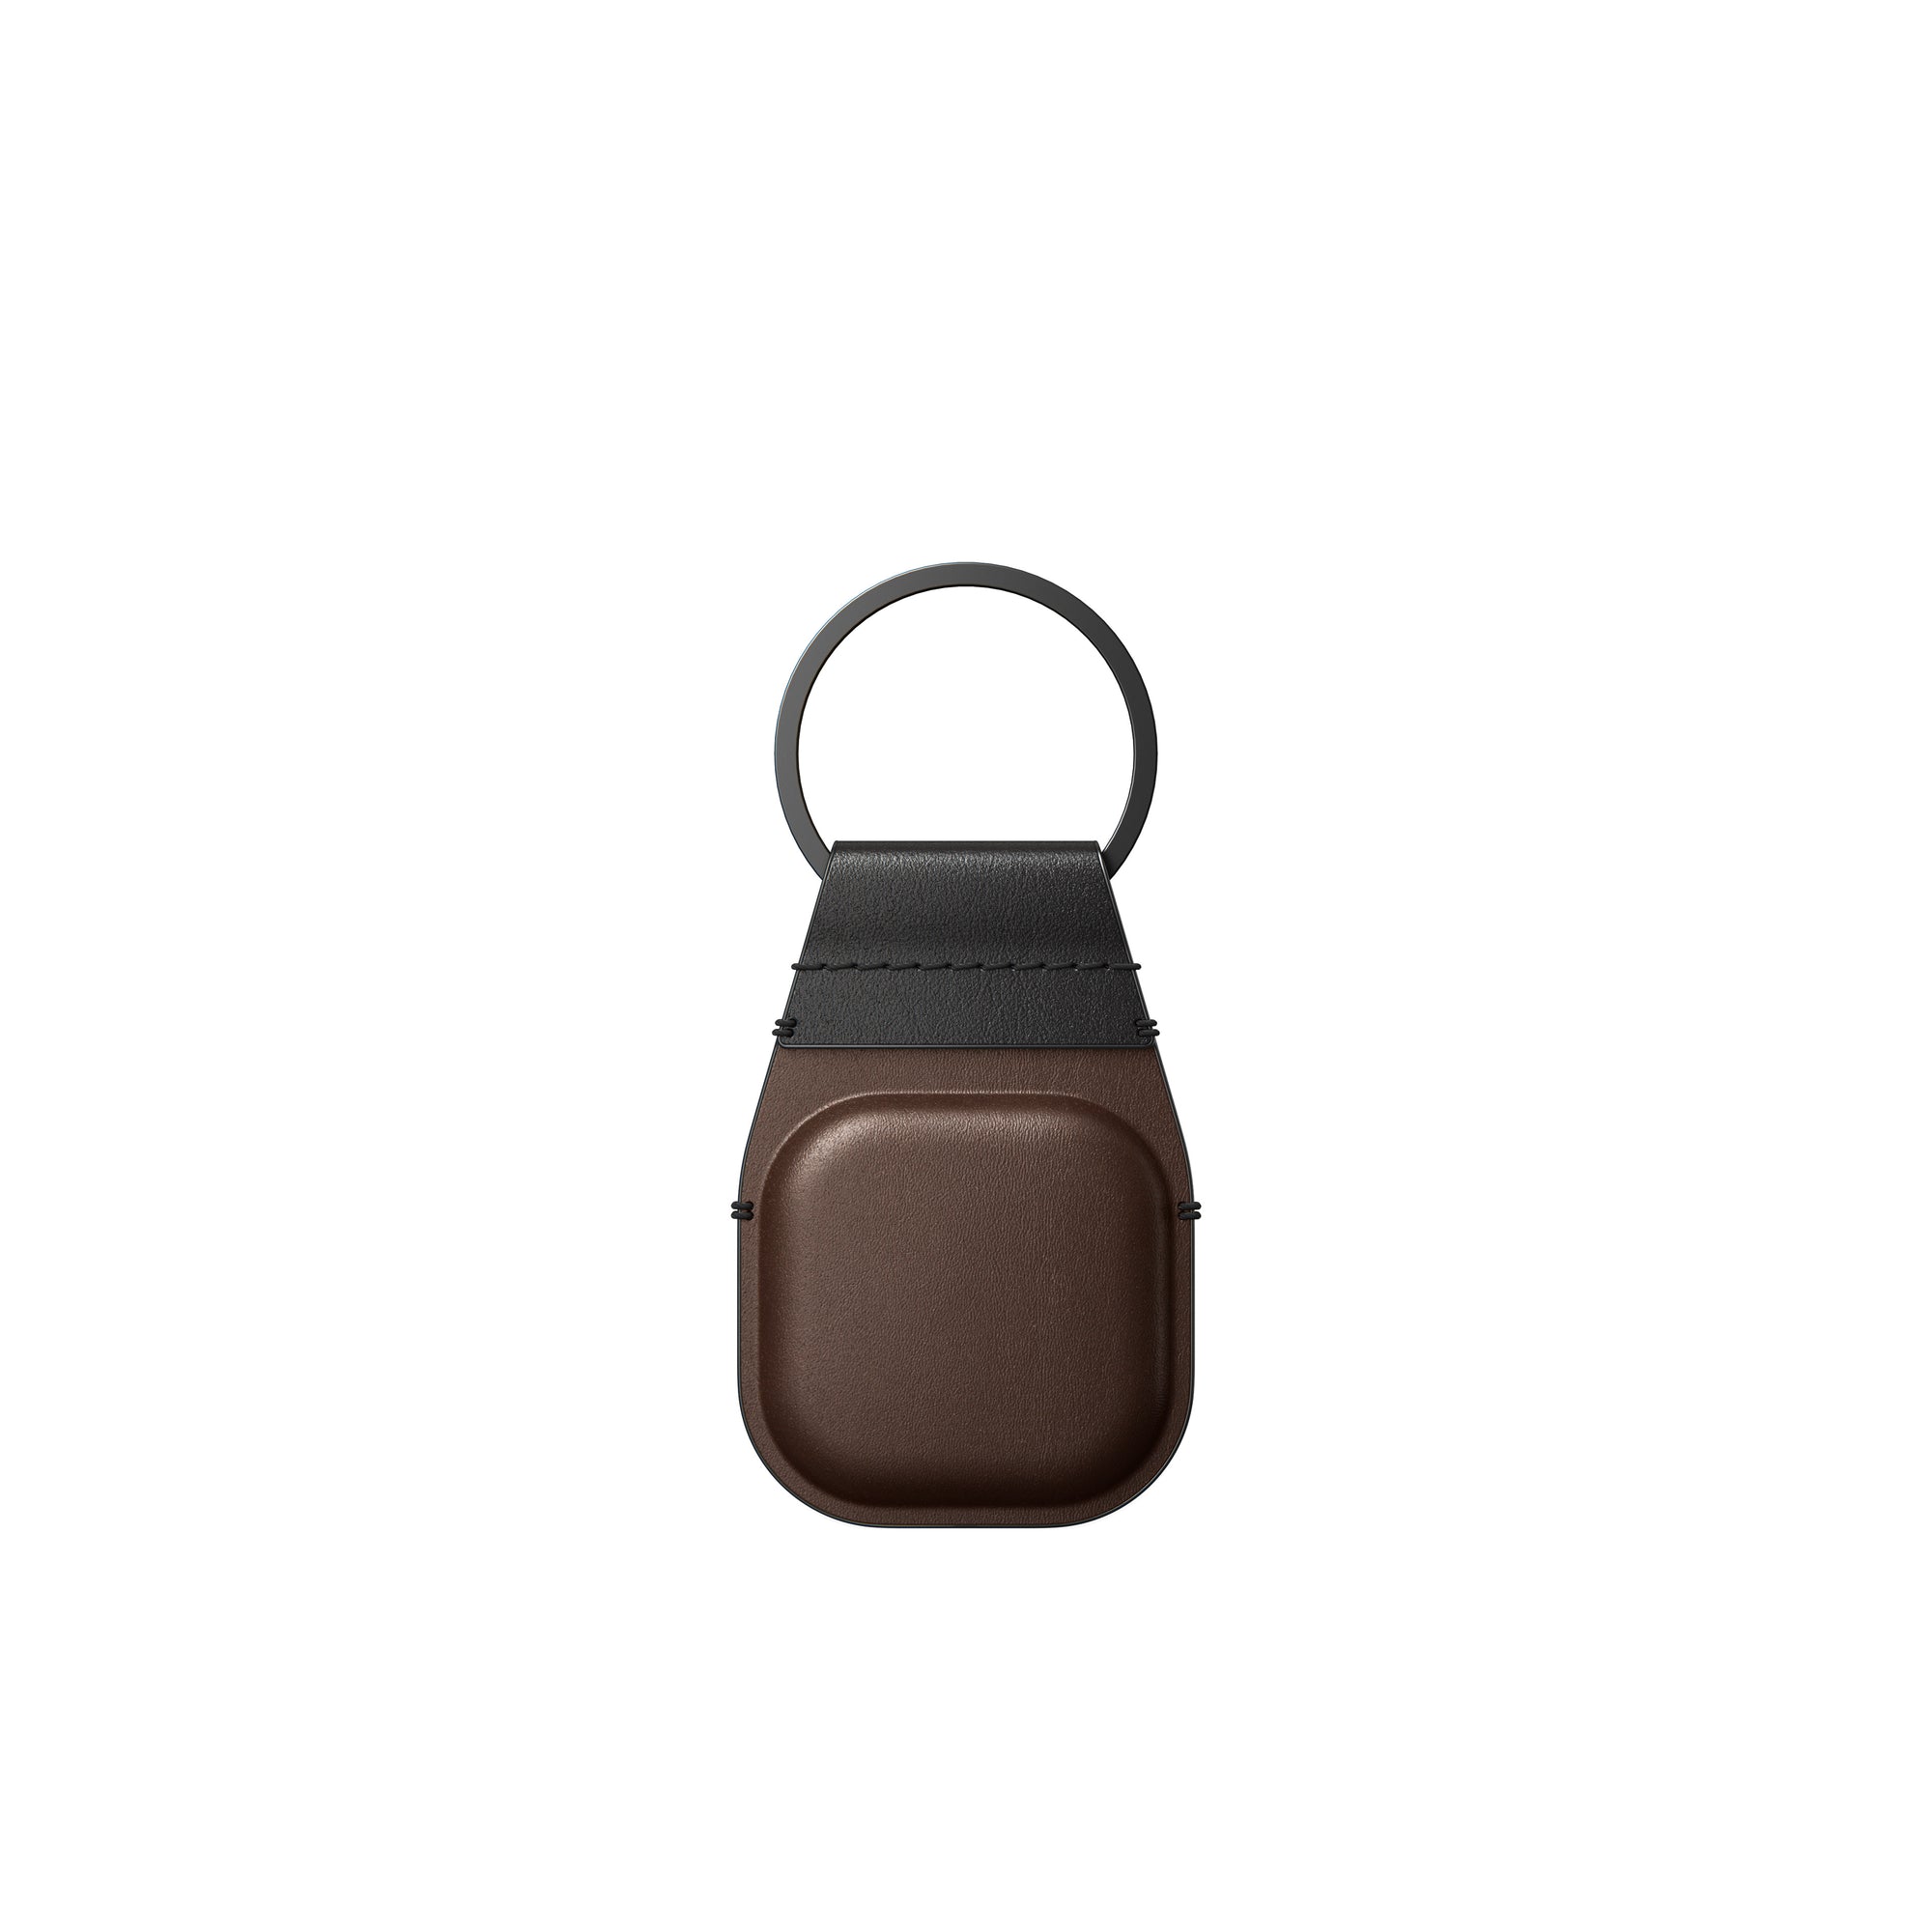 Nomad Leather Keychain For AirTag - BROWN - Mac Addict